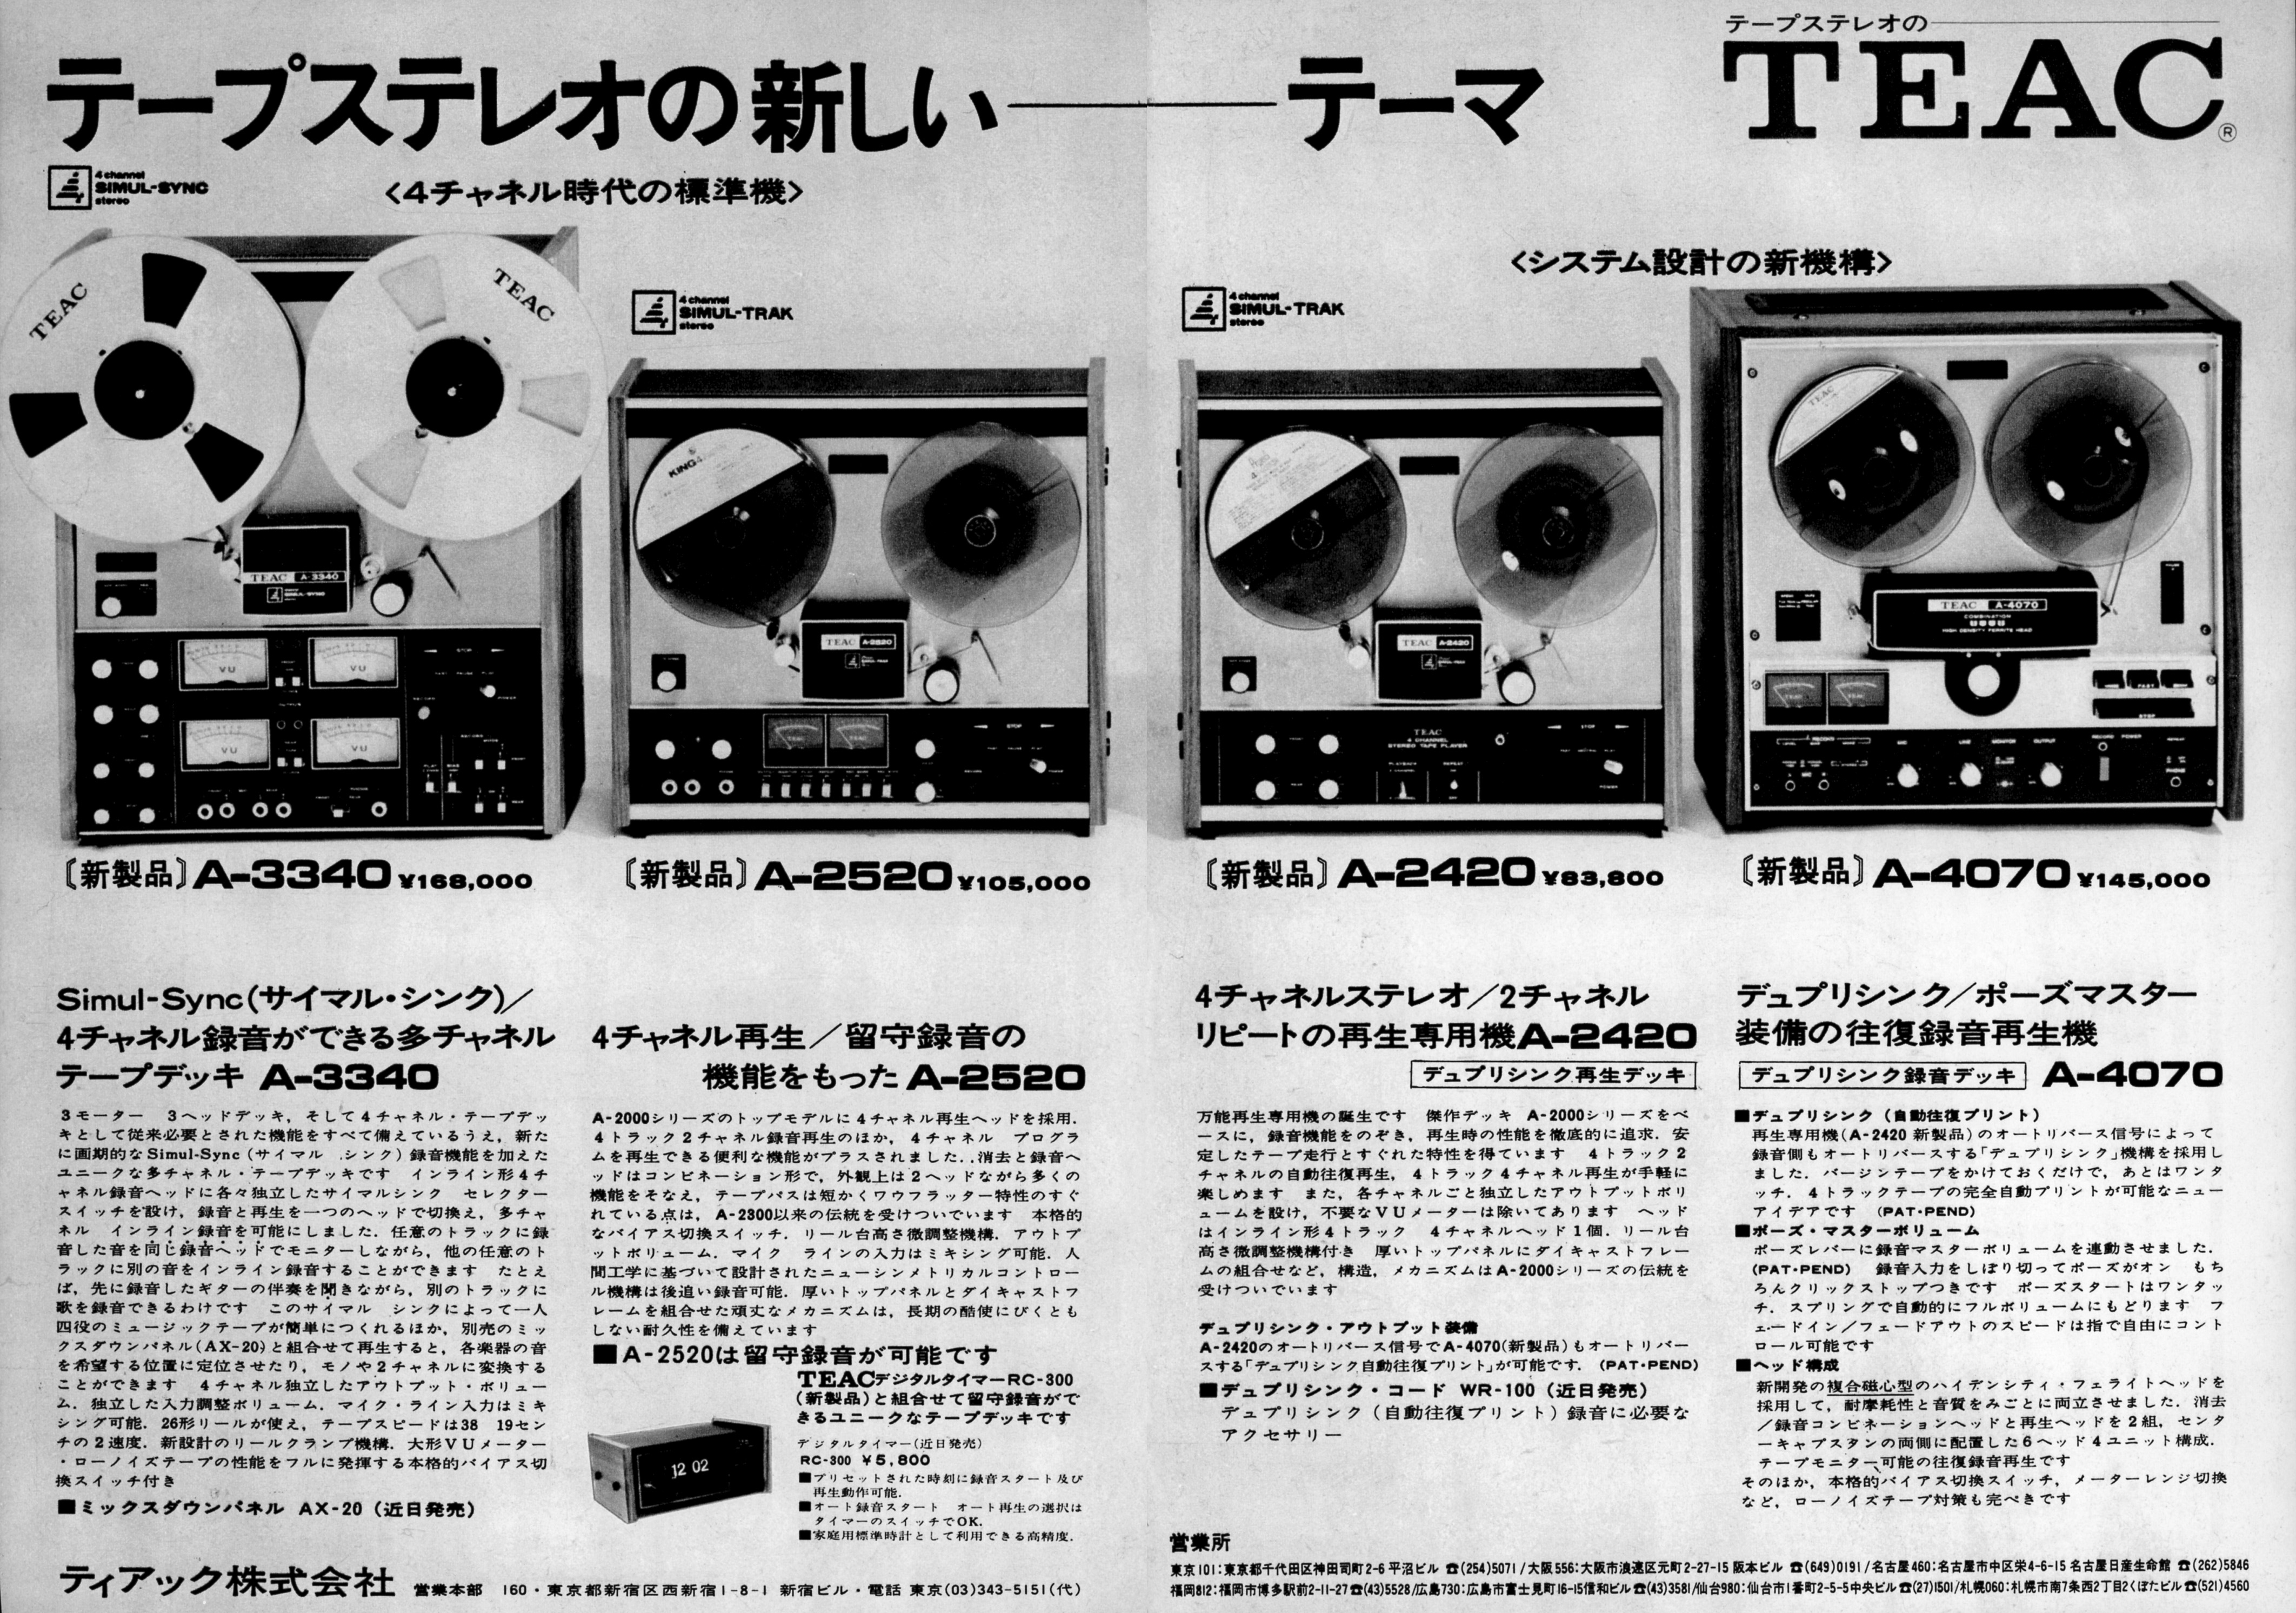 ティアック A-2420, A-2520, A-3340, A-4070 | the re:View (in the past)